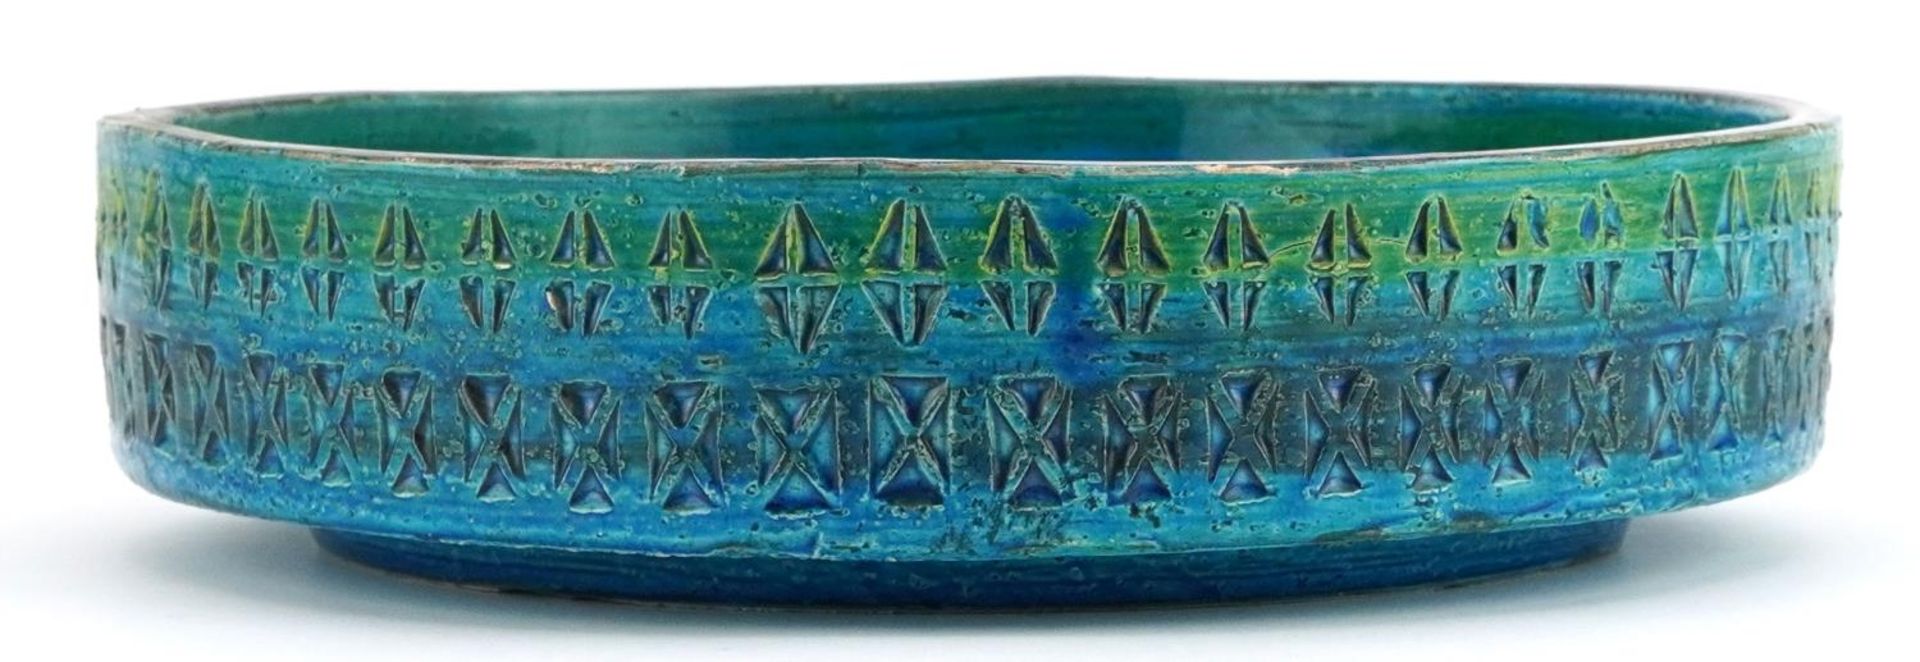 Bitossi, 1970s Italian footed centre bowl with various impressed motifs, 28cm high - Image 2 of 4